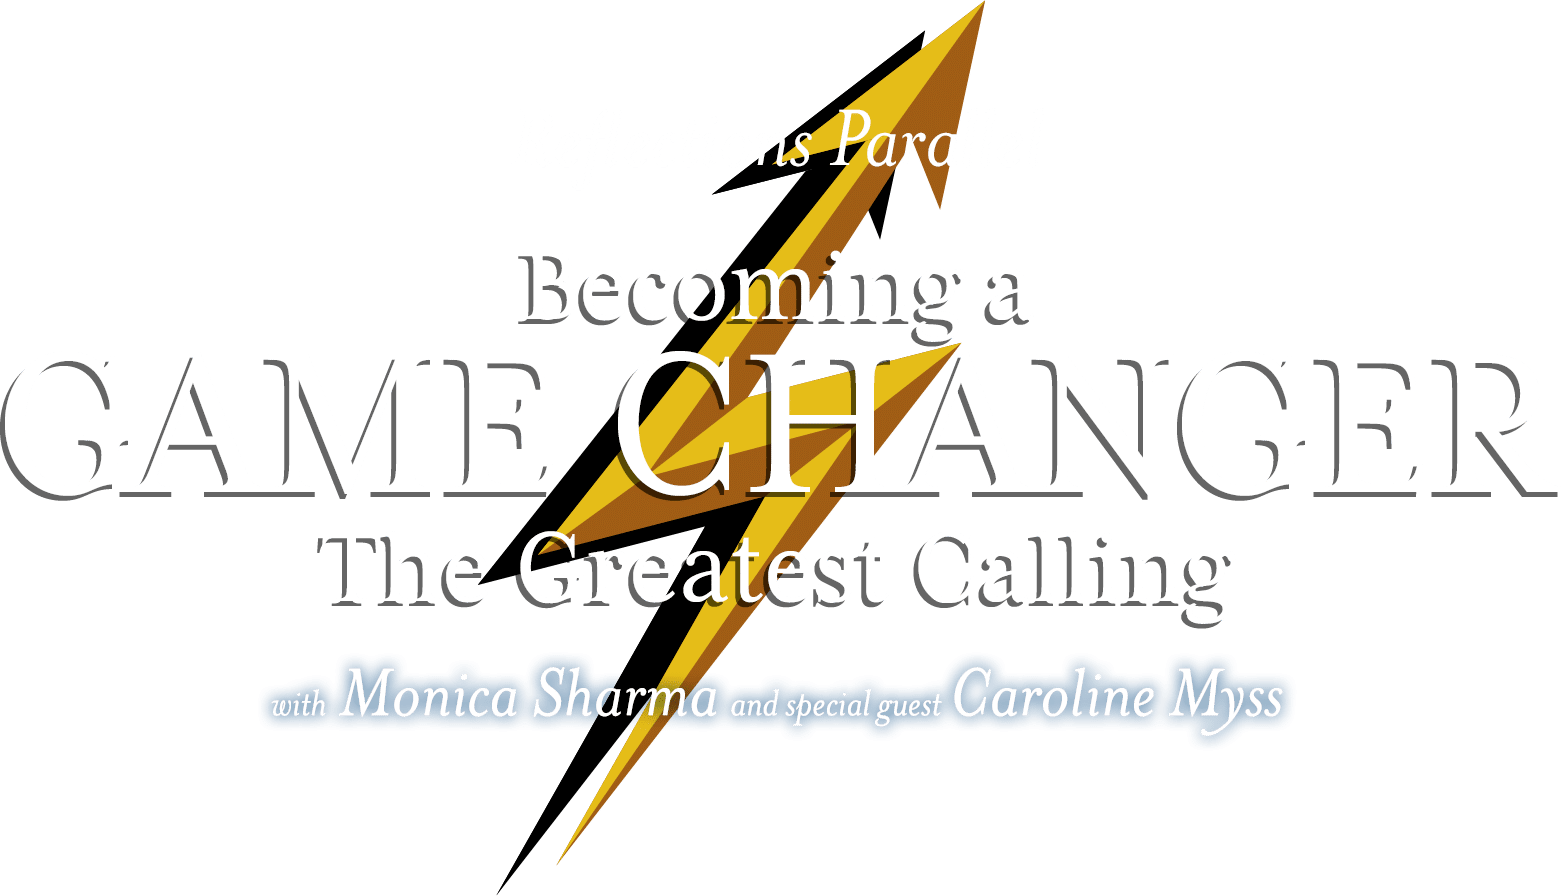 Reflections Parallel: The Greatest Calling - Becoming a Game Changer. With Monica Sharma and special guest Caroline Myss